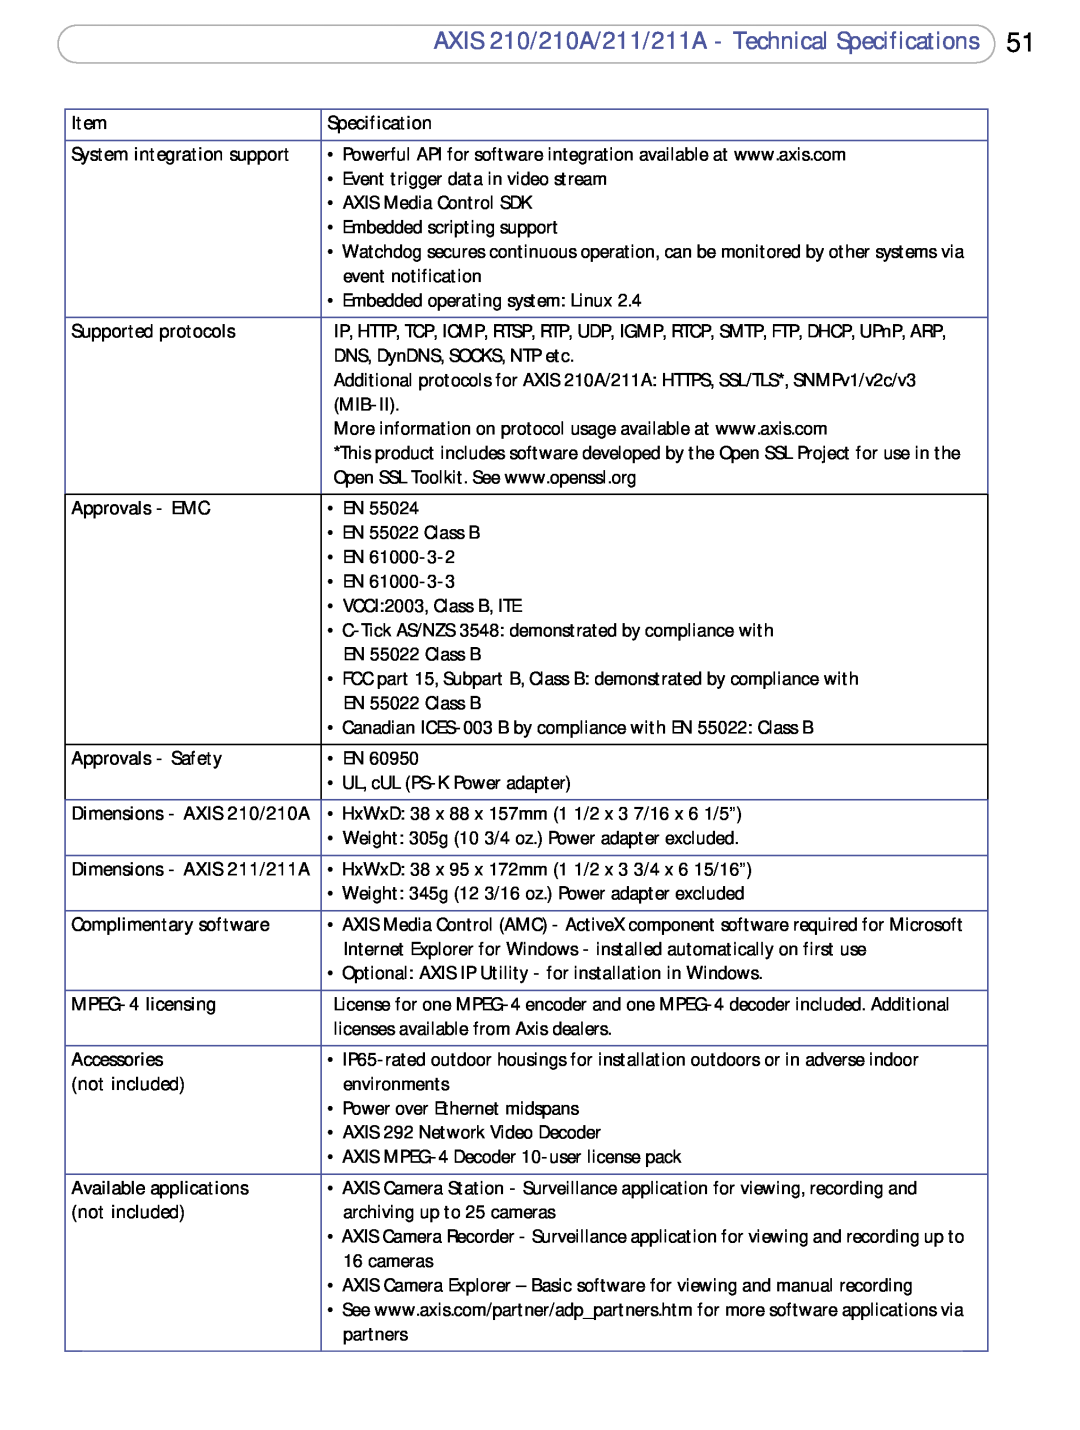 Axis Communications 211a user manual AXIS 210/210A/211/211A - Technical Specifications 